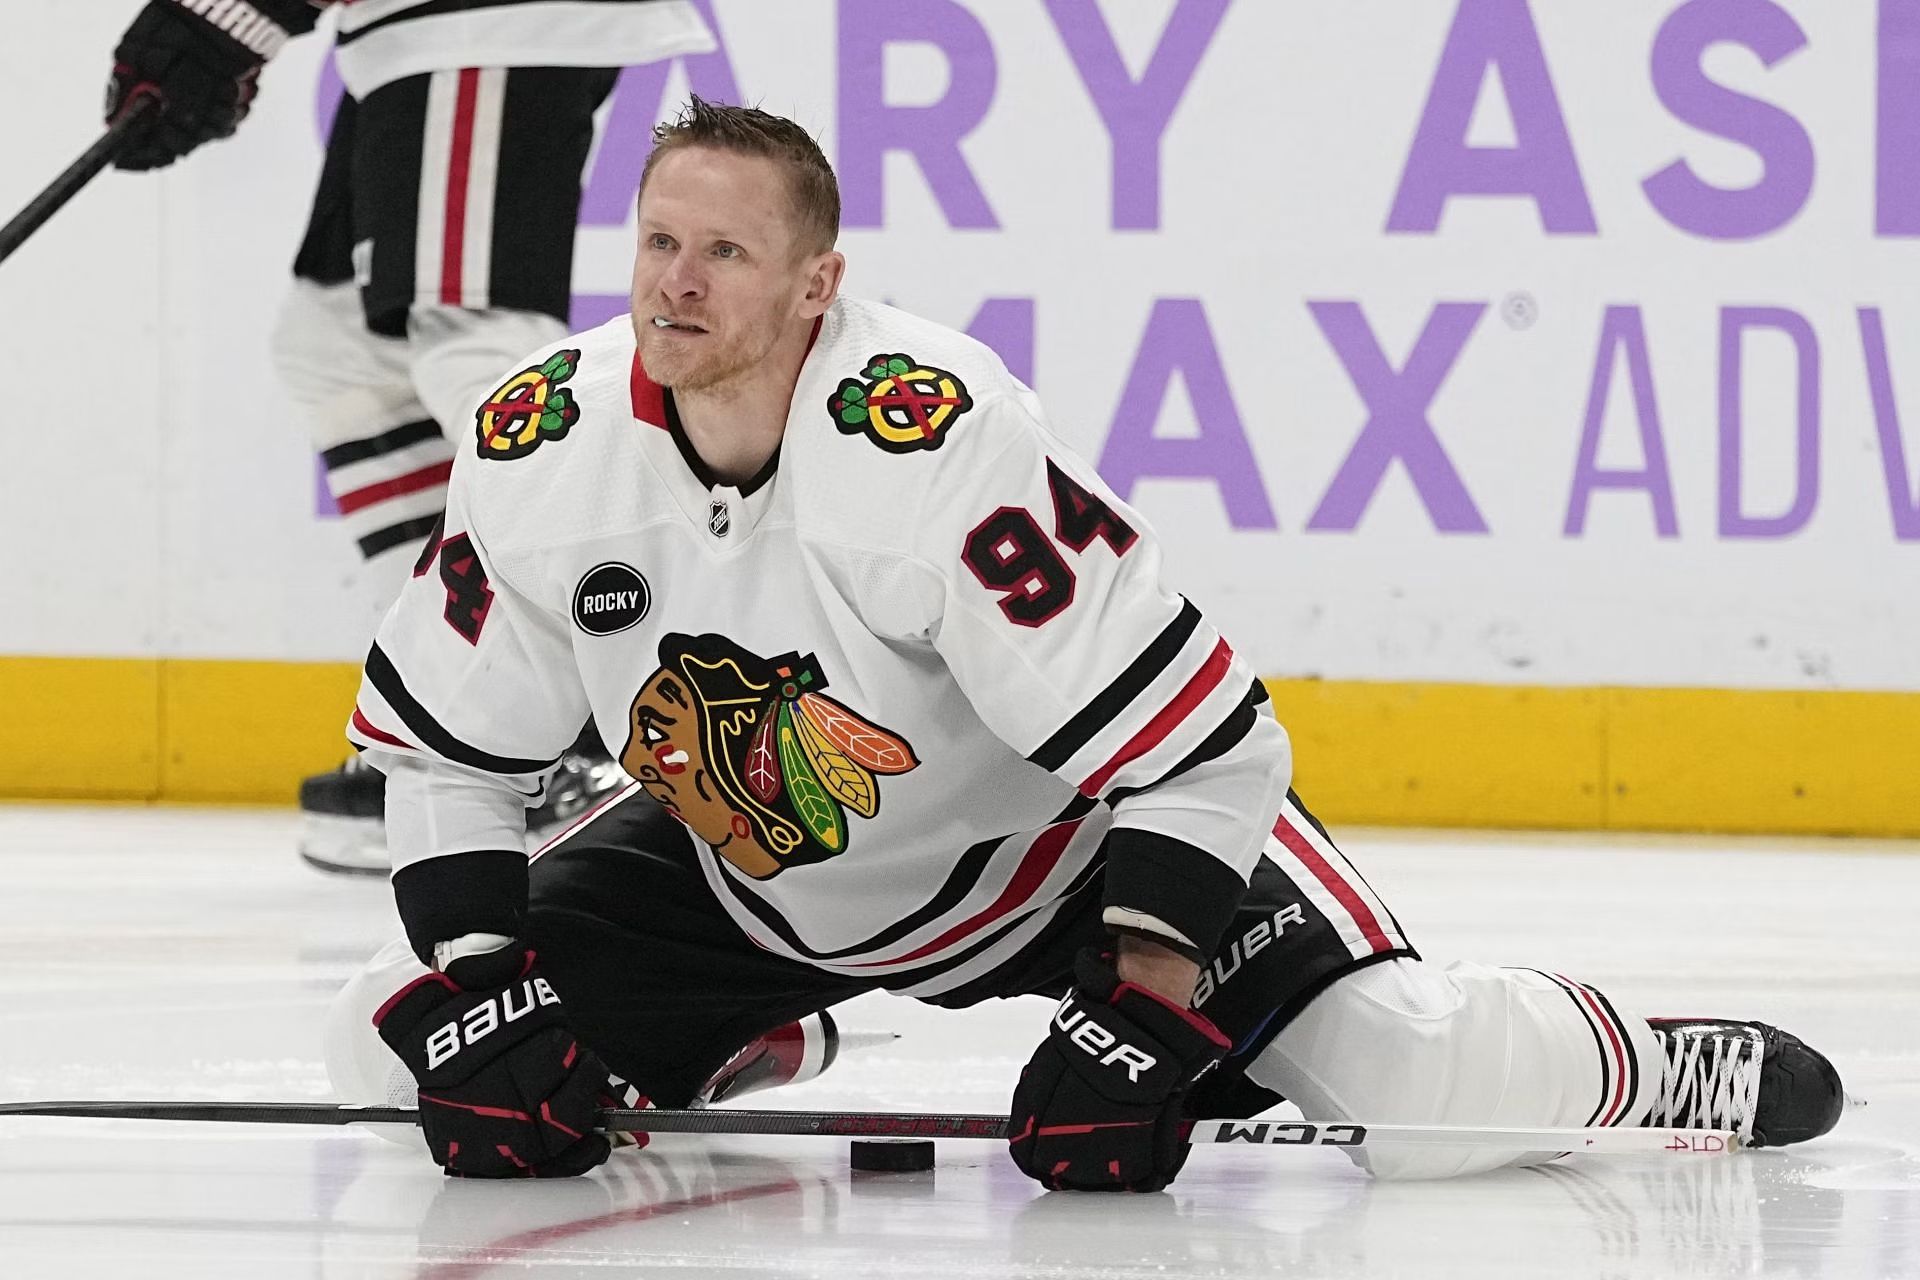 Chicago Blackhawks GM Denies Corey Perry’s Contract Cut Tied To Alleged Affair